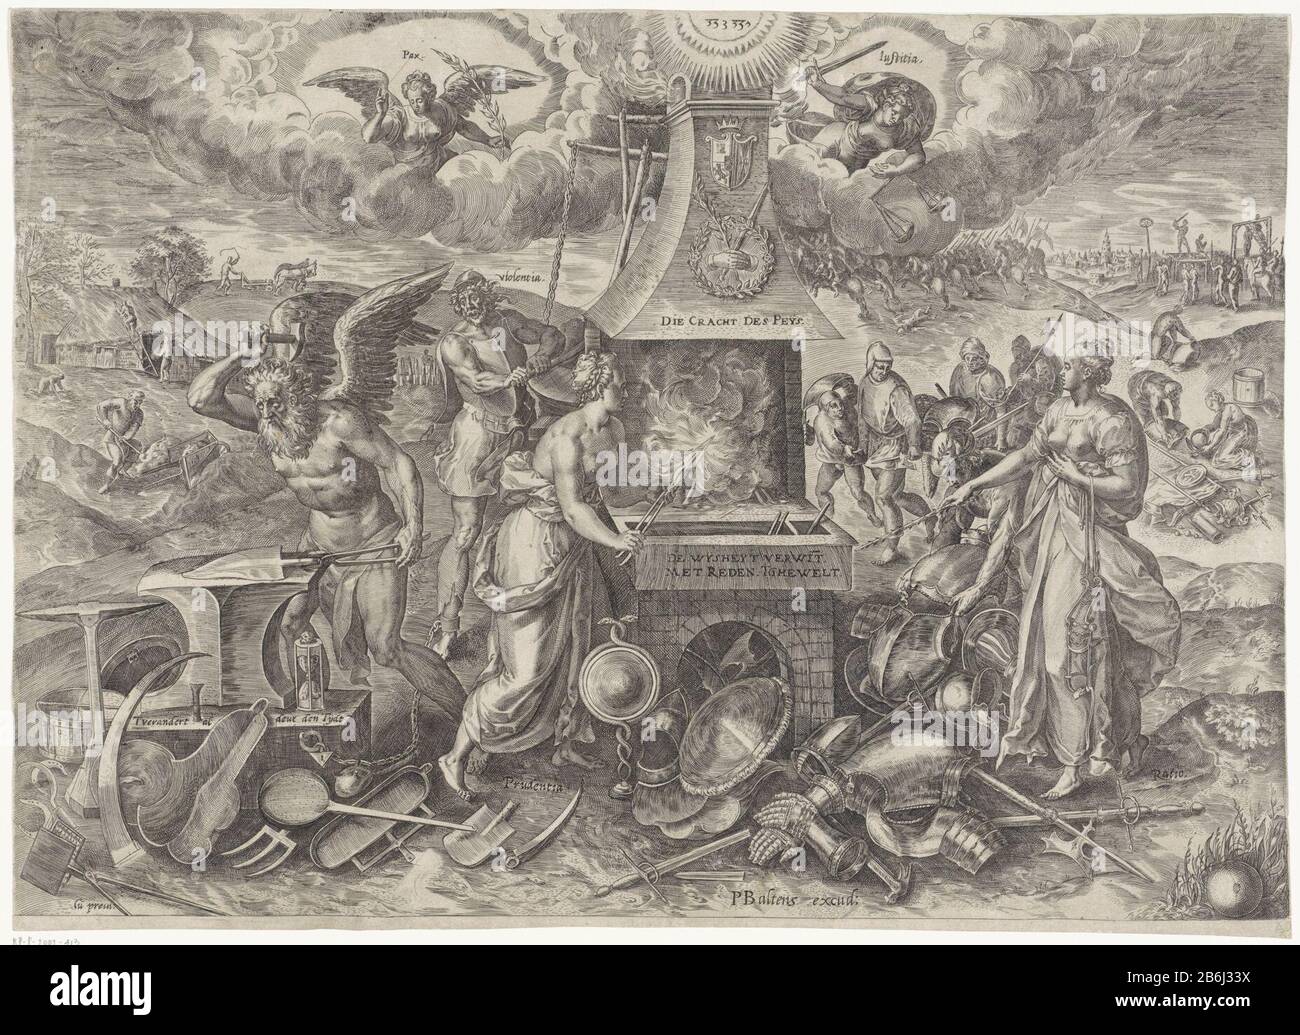 Allegory closed at peace with the Edict of 1577. Caution (Prudentia) forges heavy: den into plowshares, in an oven. She is helped by Reason (ratio). The chimney weapon of Don Juan. Father Time agricultural forge weapons and armor. Violence (Violentia) is chained to the anvil, and is forced to assist in the heating of the furnace. Right in the background represents the end of the war. Left in the background edit fields, in reference to the development of the country. look from heaven Peace (Pax) and Justice (Justitia) increasing. Between them the tetragrammaton as a symbol of God Vader. Manufac Stock Photo